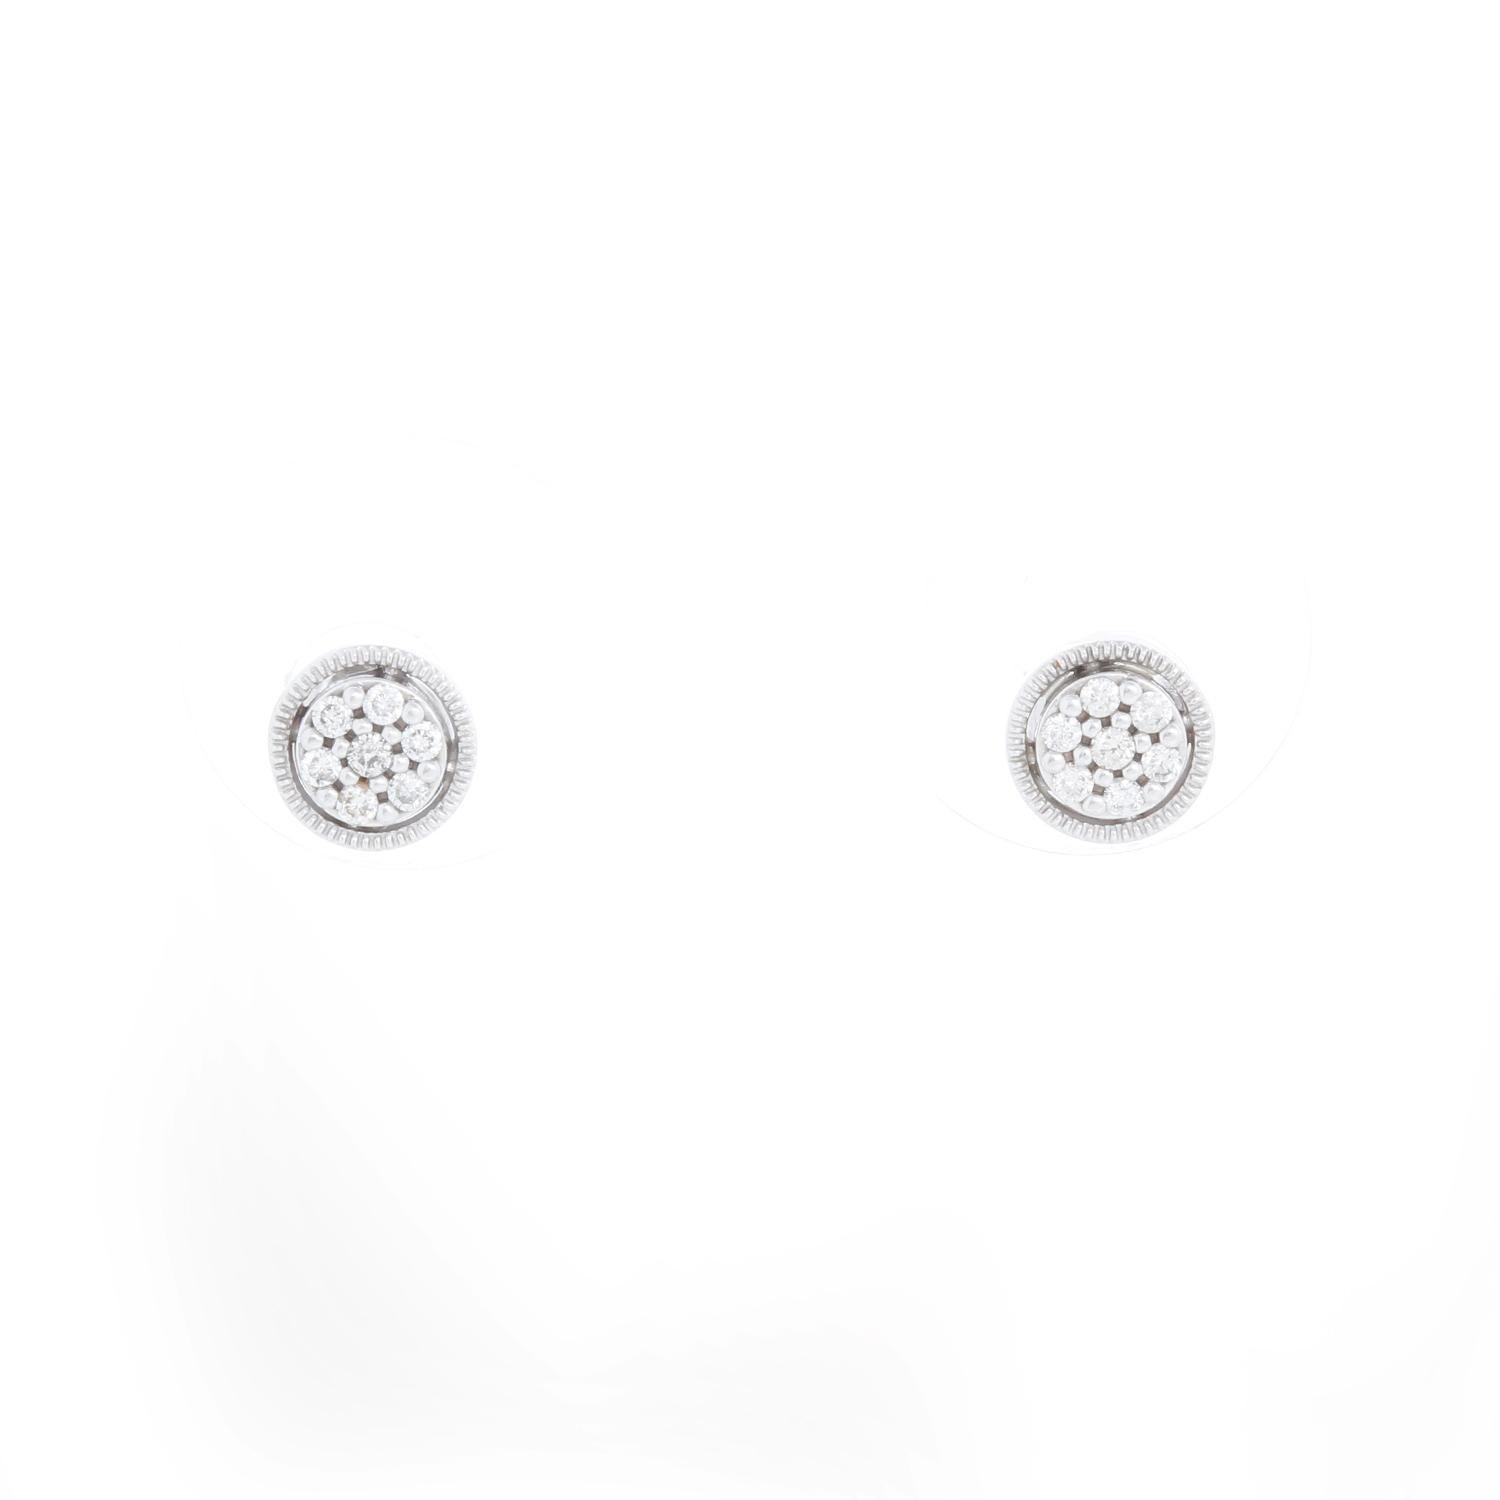 14K White gold Halo Pave Diamond Studs - Halo style studs set in 14K white gold. Weighing approximately .50 cts. Excellent every day earrings. Total weight 1.5 grams.